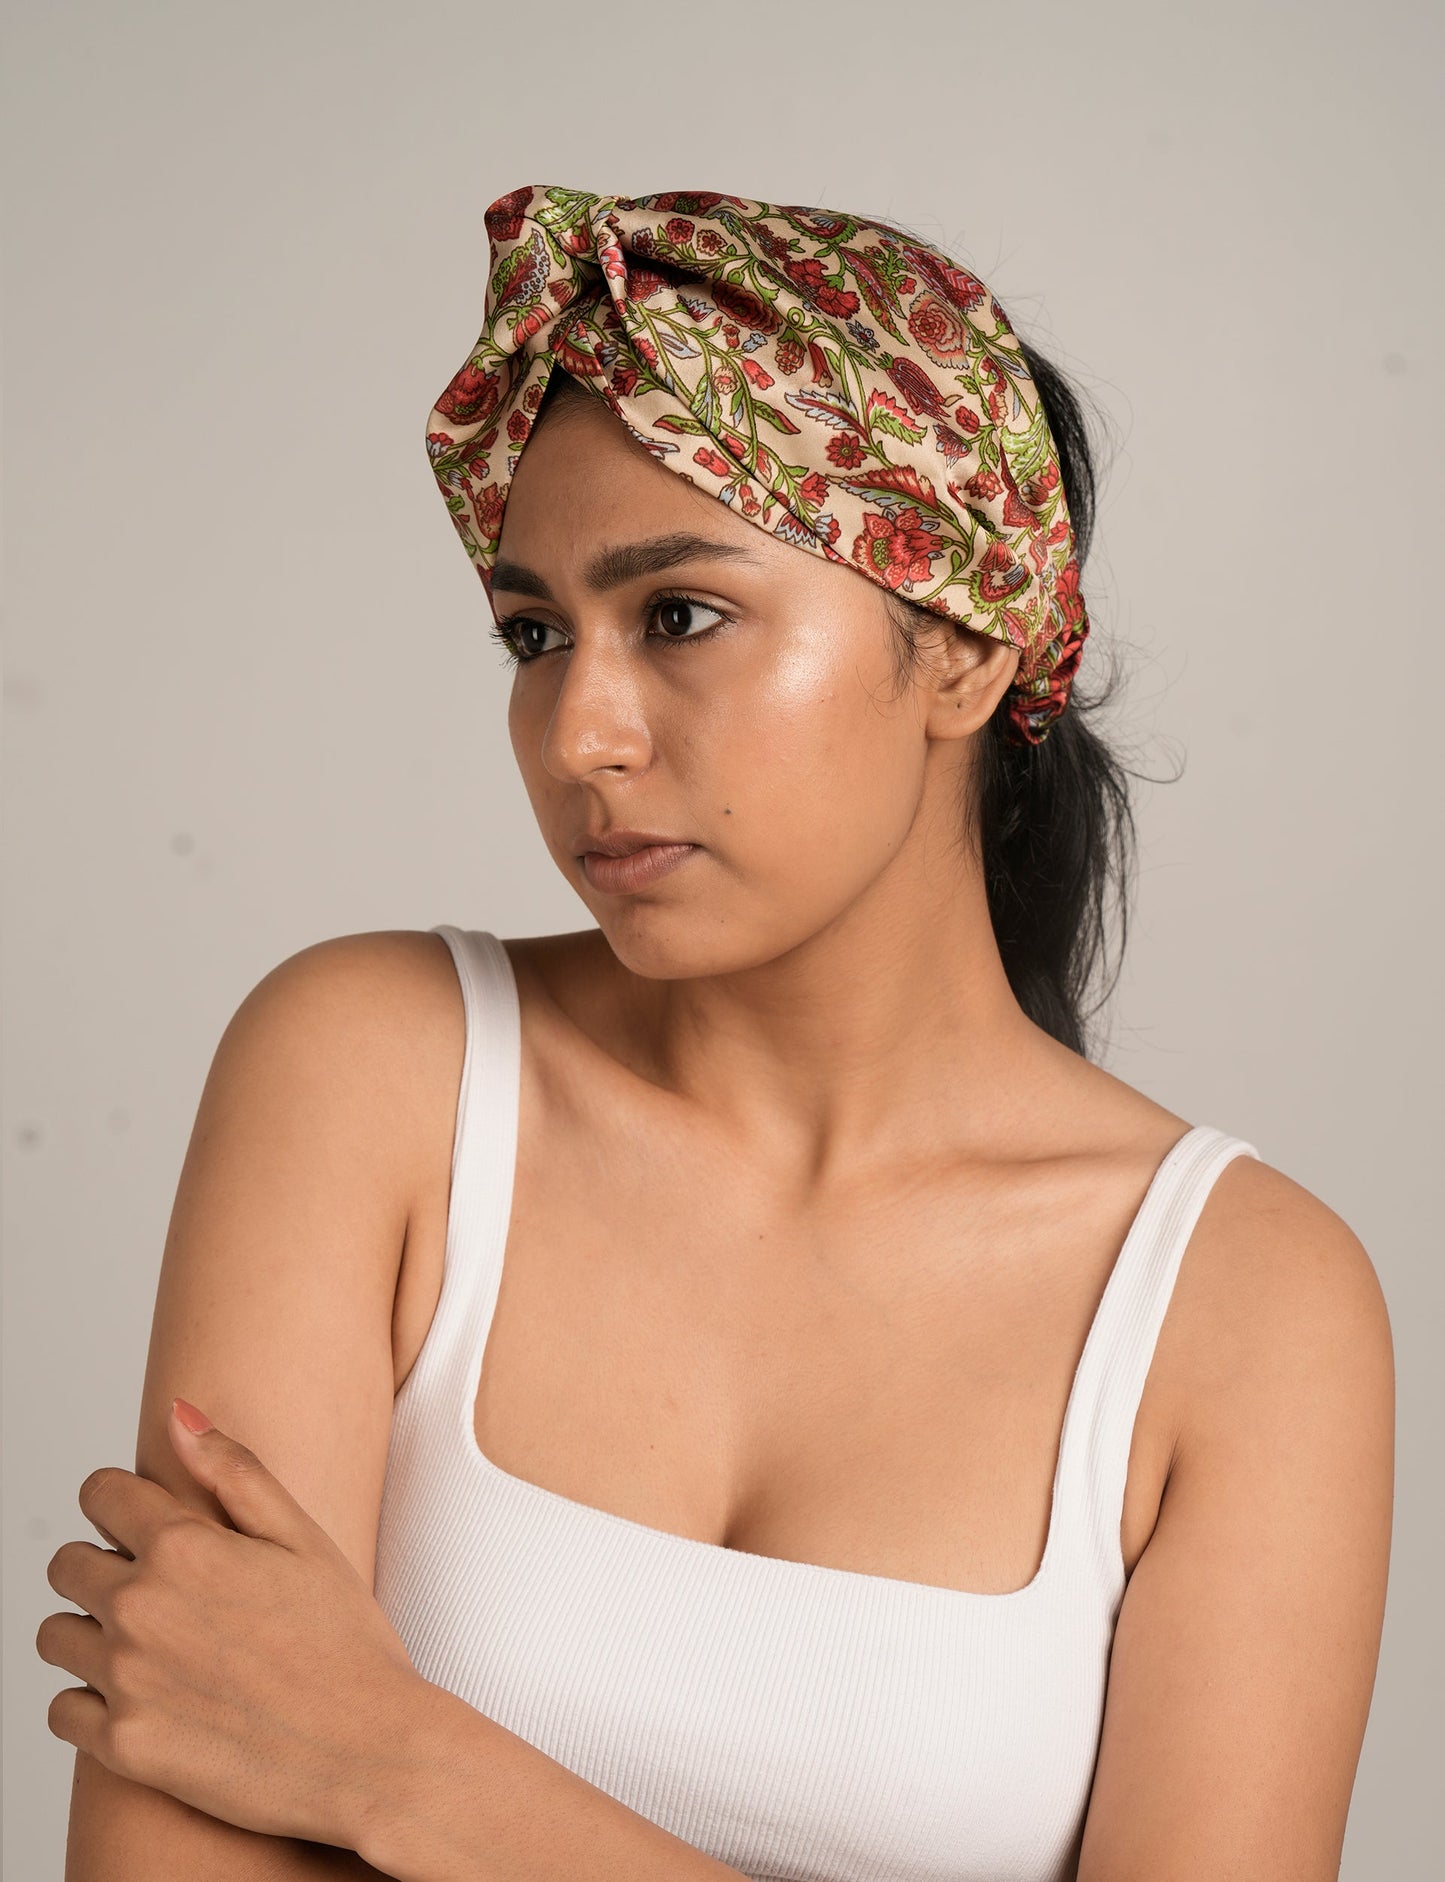 Elevate your style with our LIGHT TURBAN – the perfect finishing touch featuring contrasting vibrant prints from traditional Indian saris. Hand-sewn with care, these turbans give a second life to upcycled saris, transforming lives and supporting fair wages for our craftswomen. Embrace fashion with purpose.